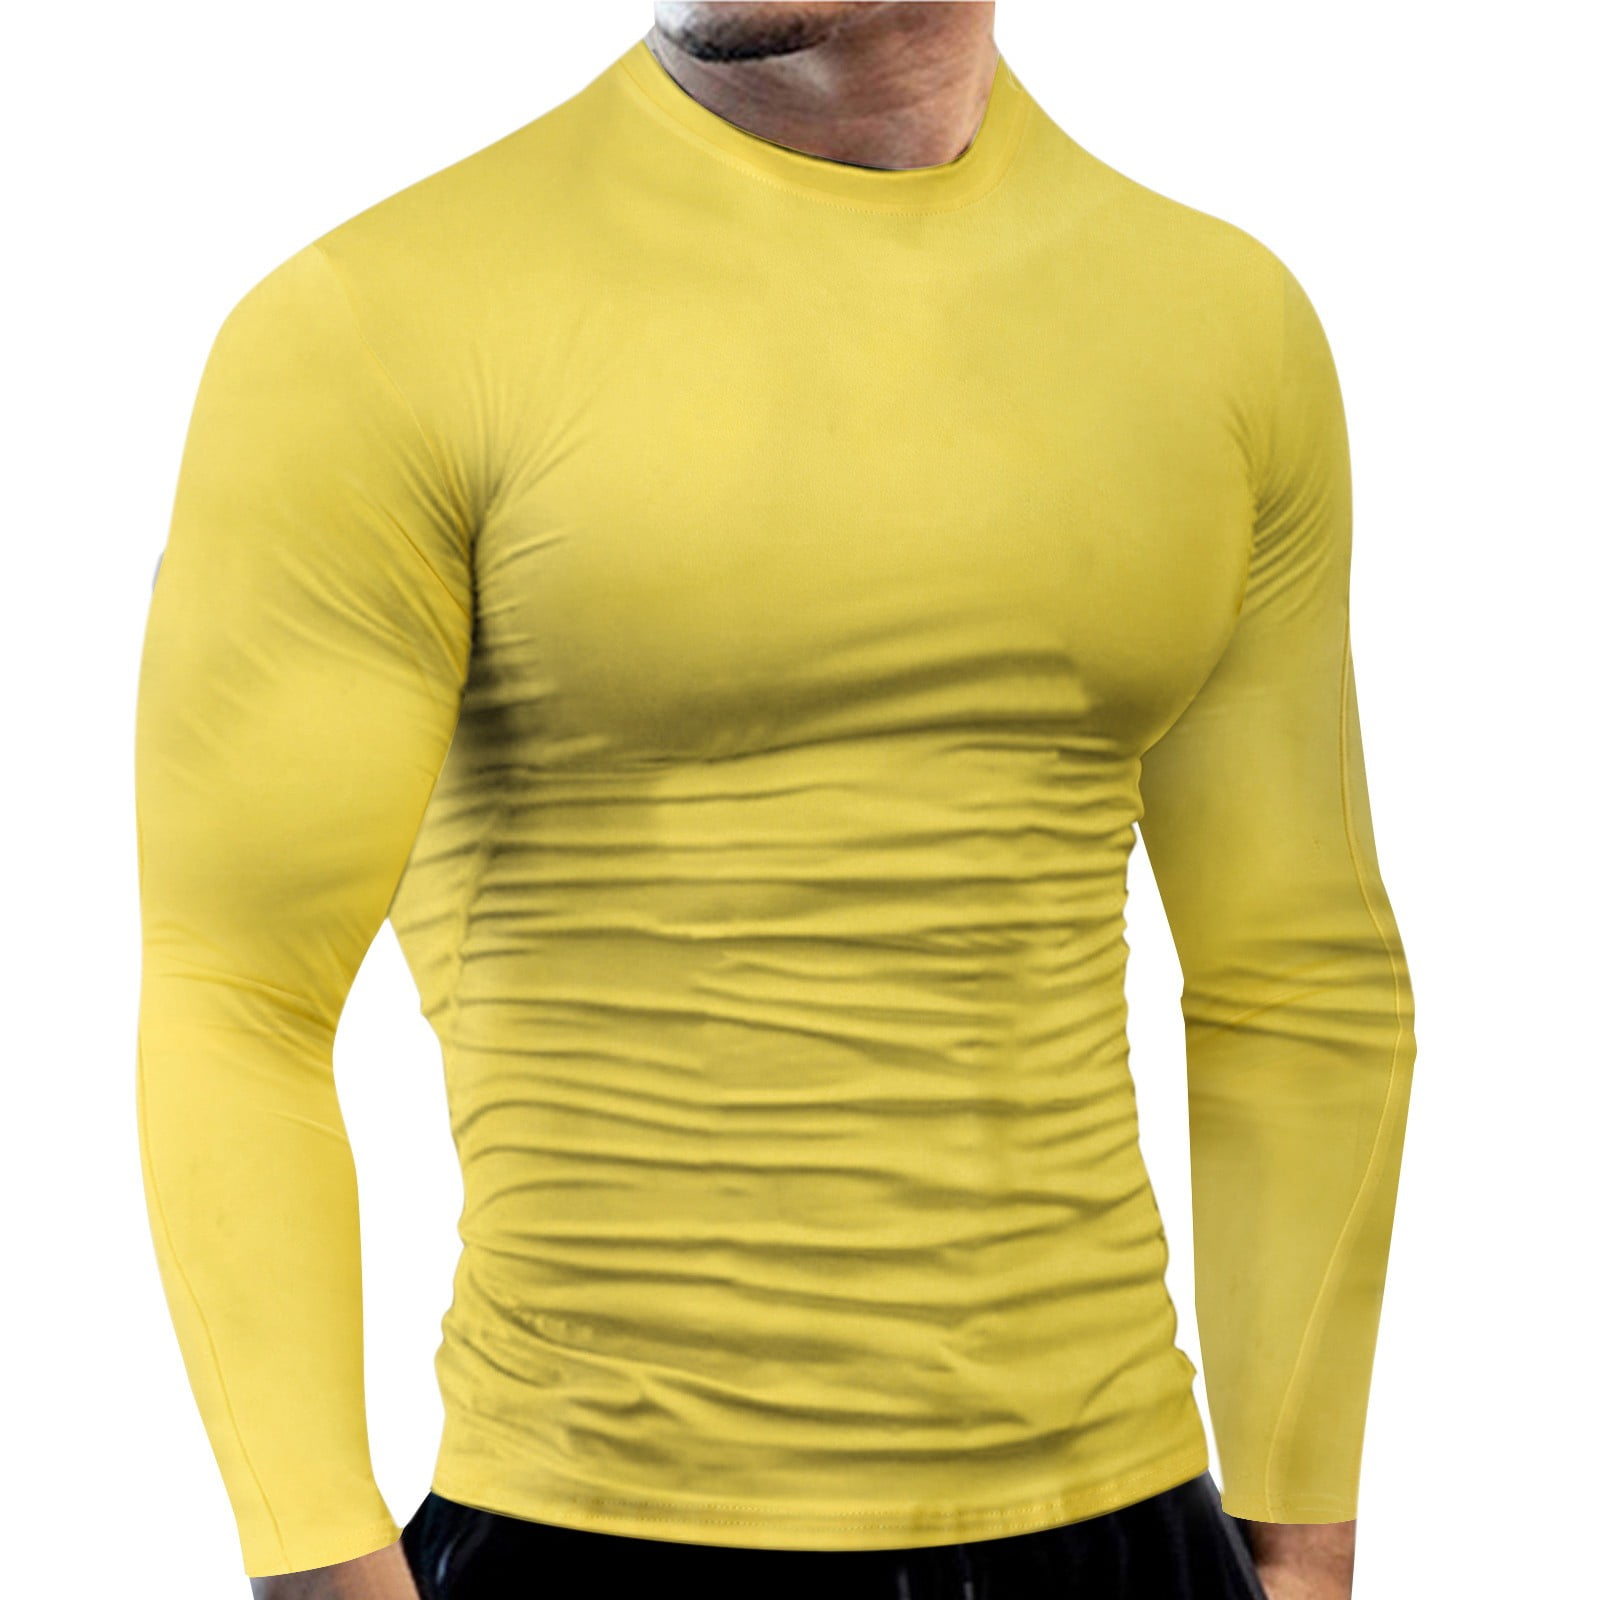 Wozhidaose Compression Shirts for Men Fitness Sports Long Sleeve T Shirt  Round Neck Solid Tight Elastic Bottoming Top Comfort Colors Tshirt Beige L  